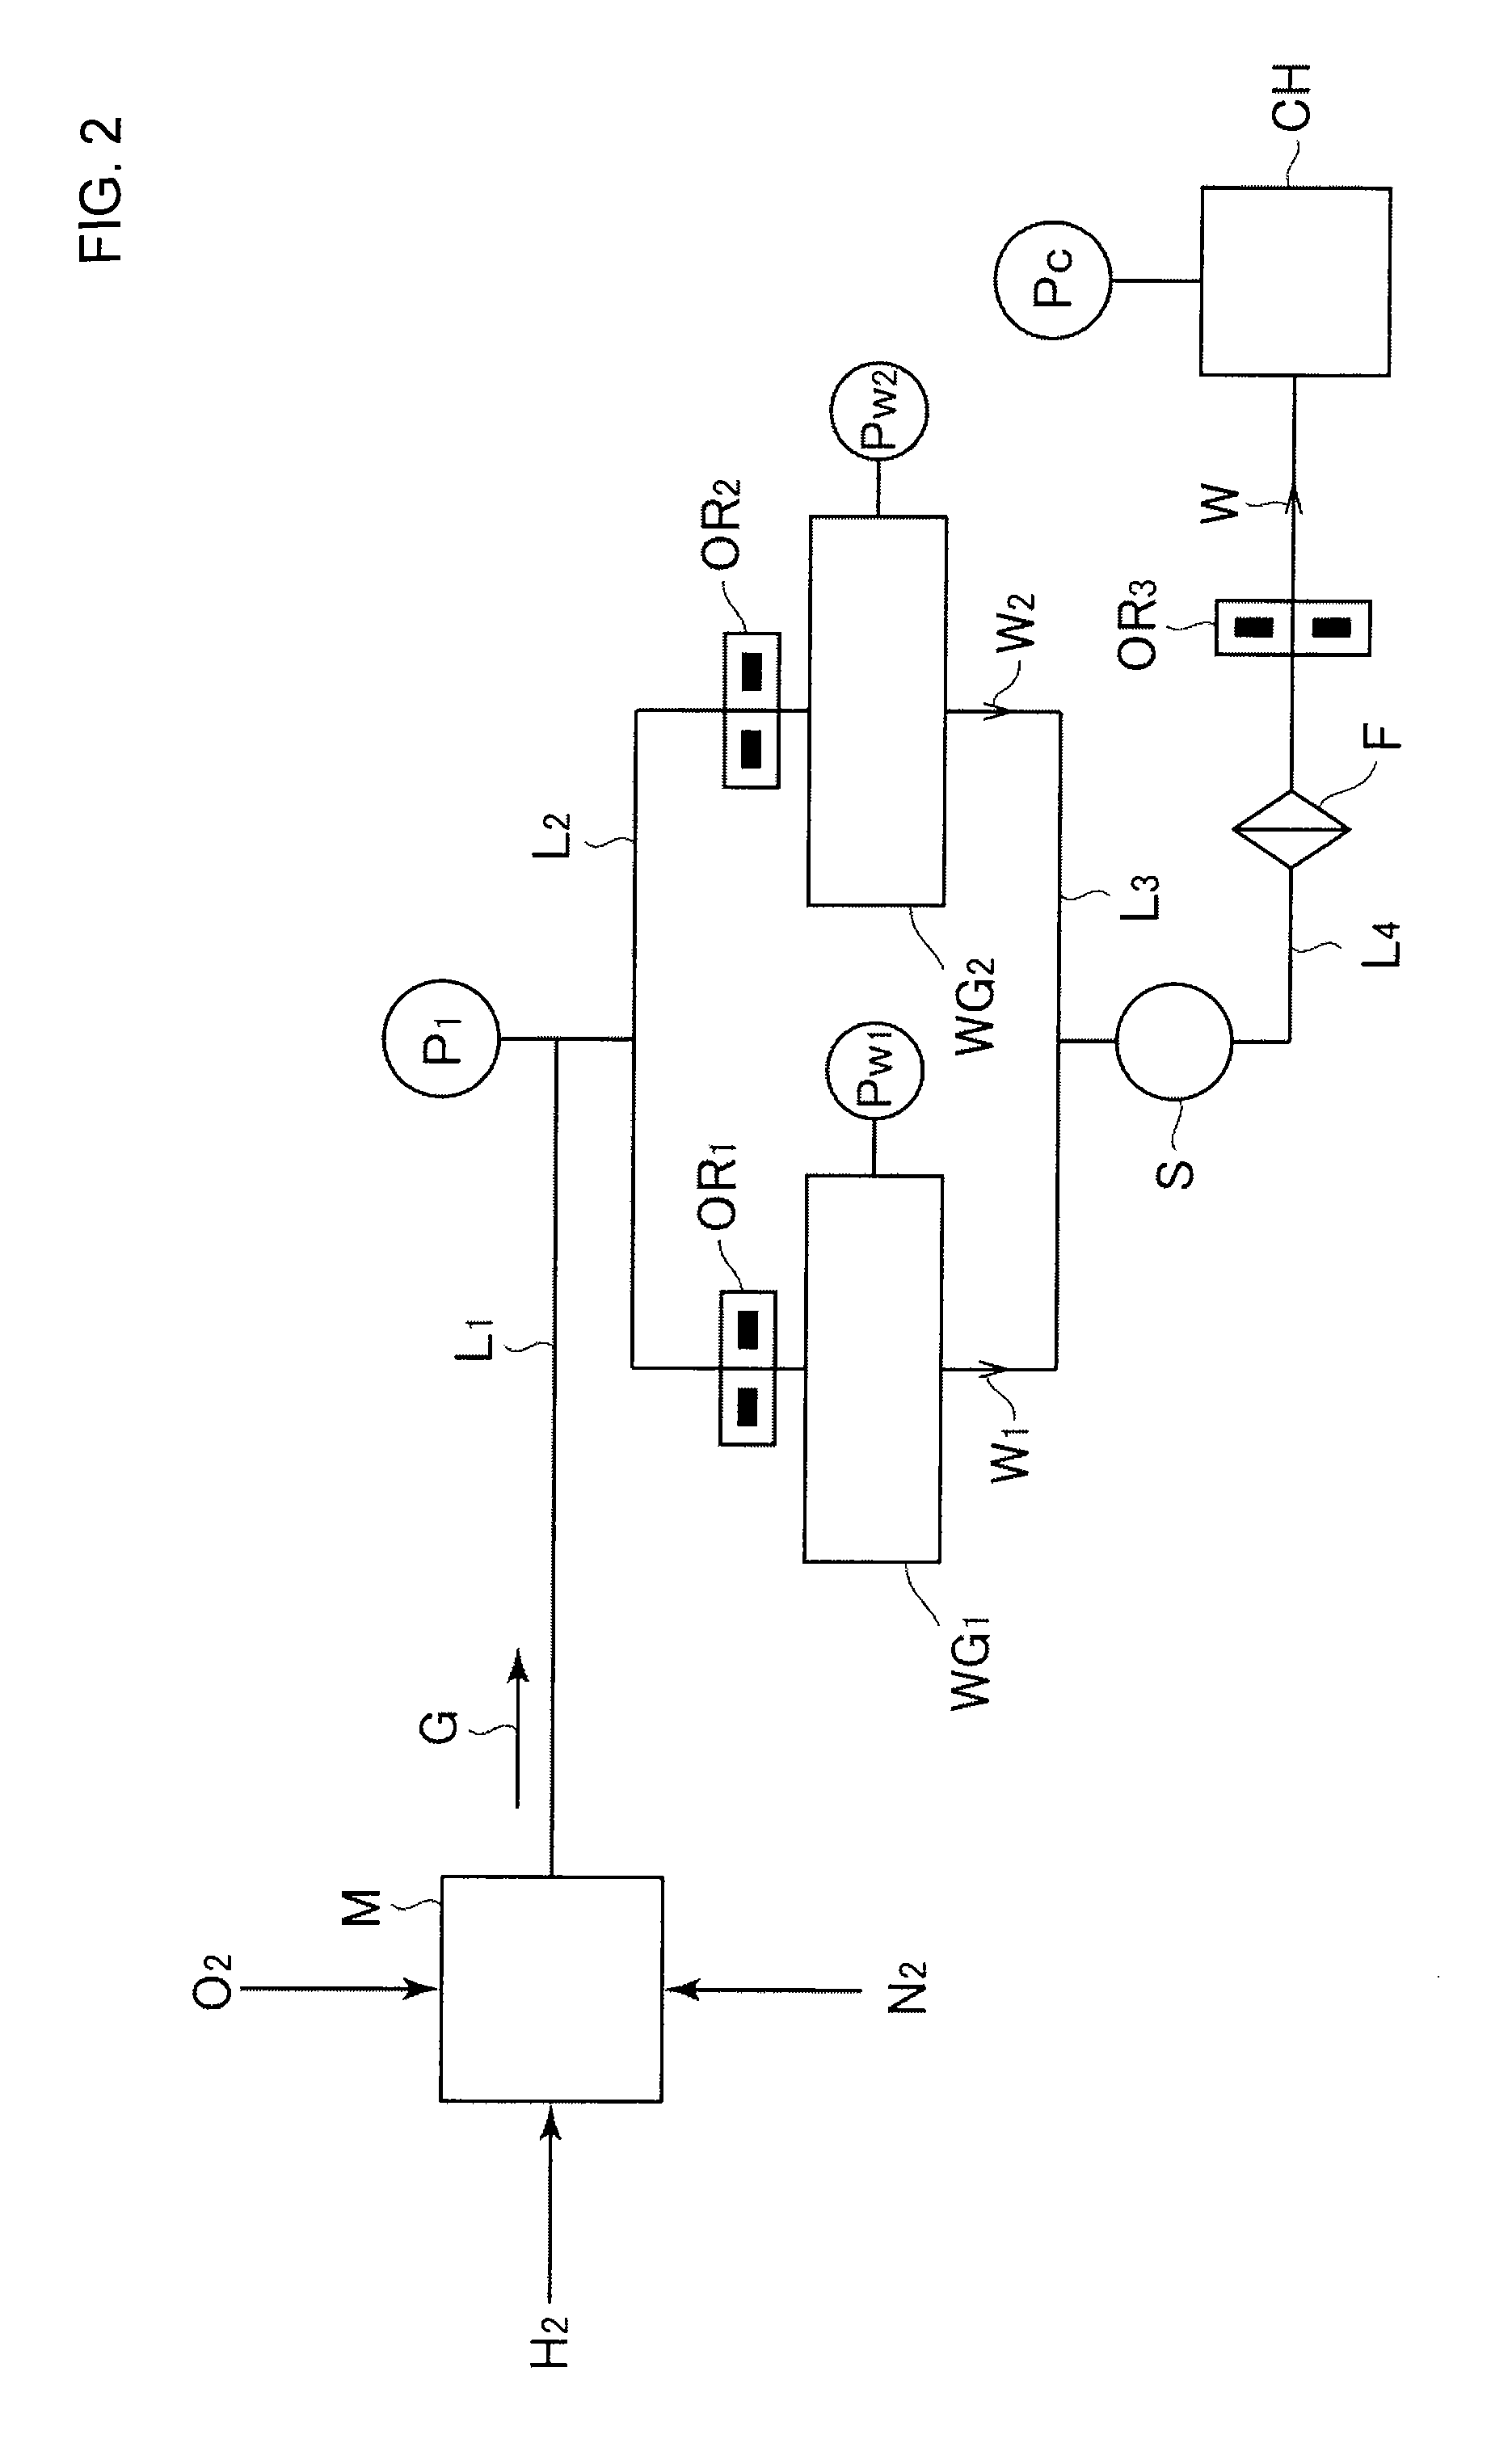 Method for parallel operation of reactors that generate moisture